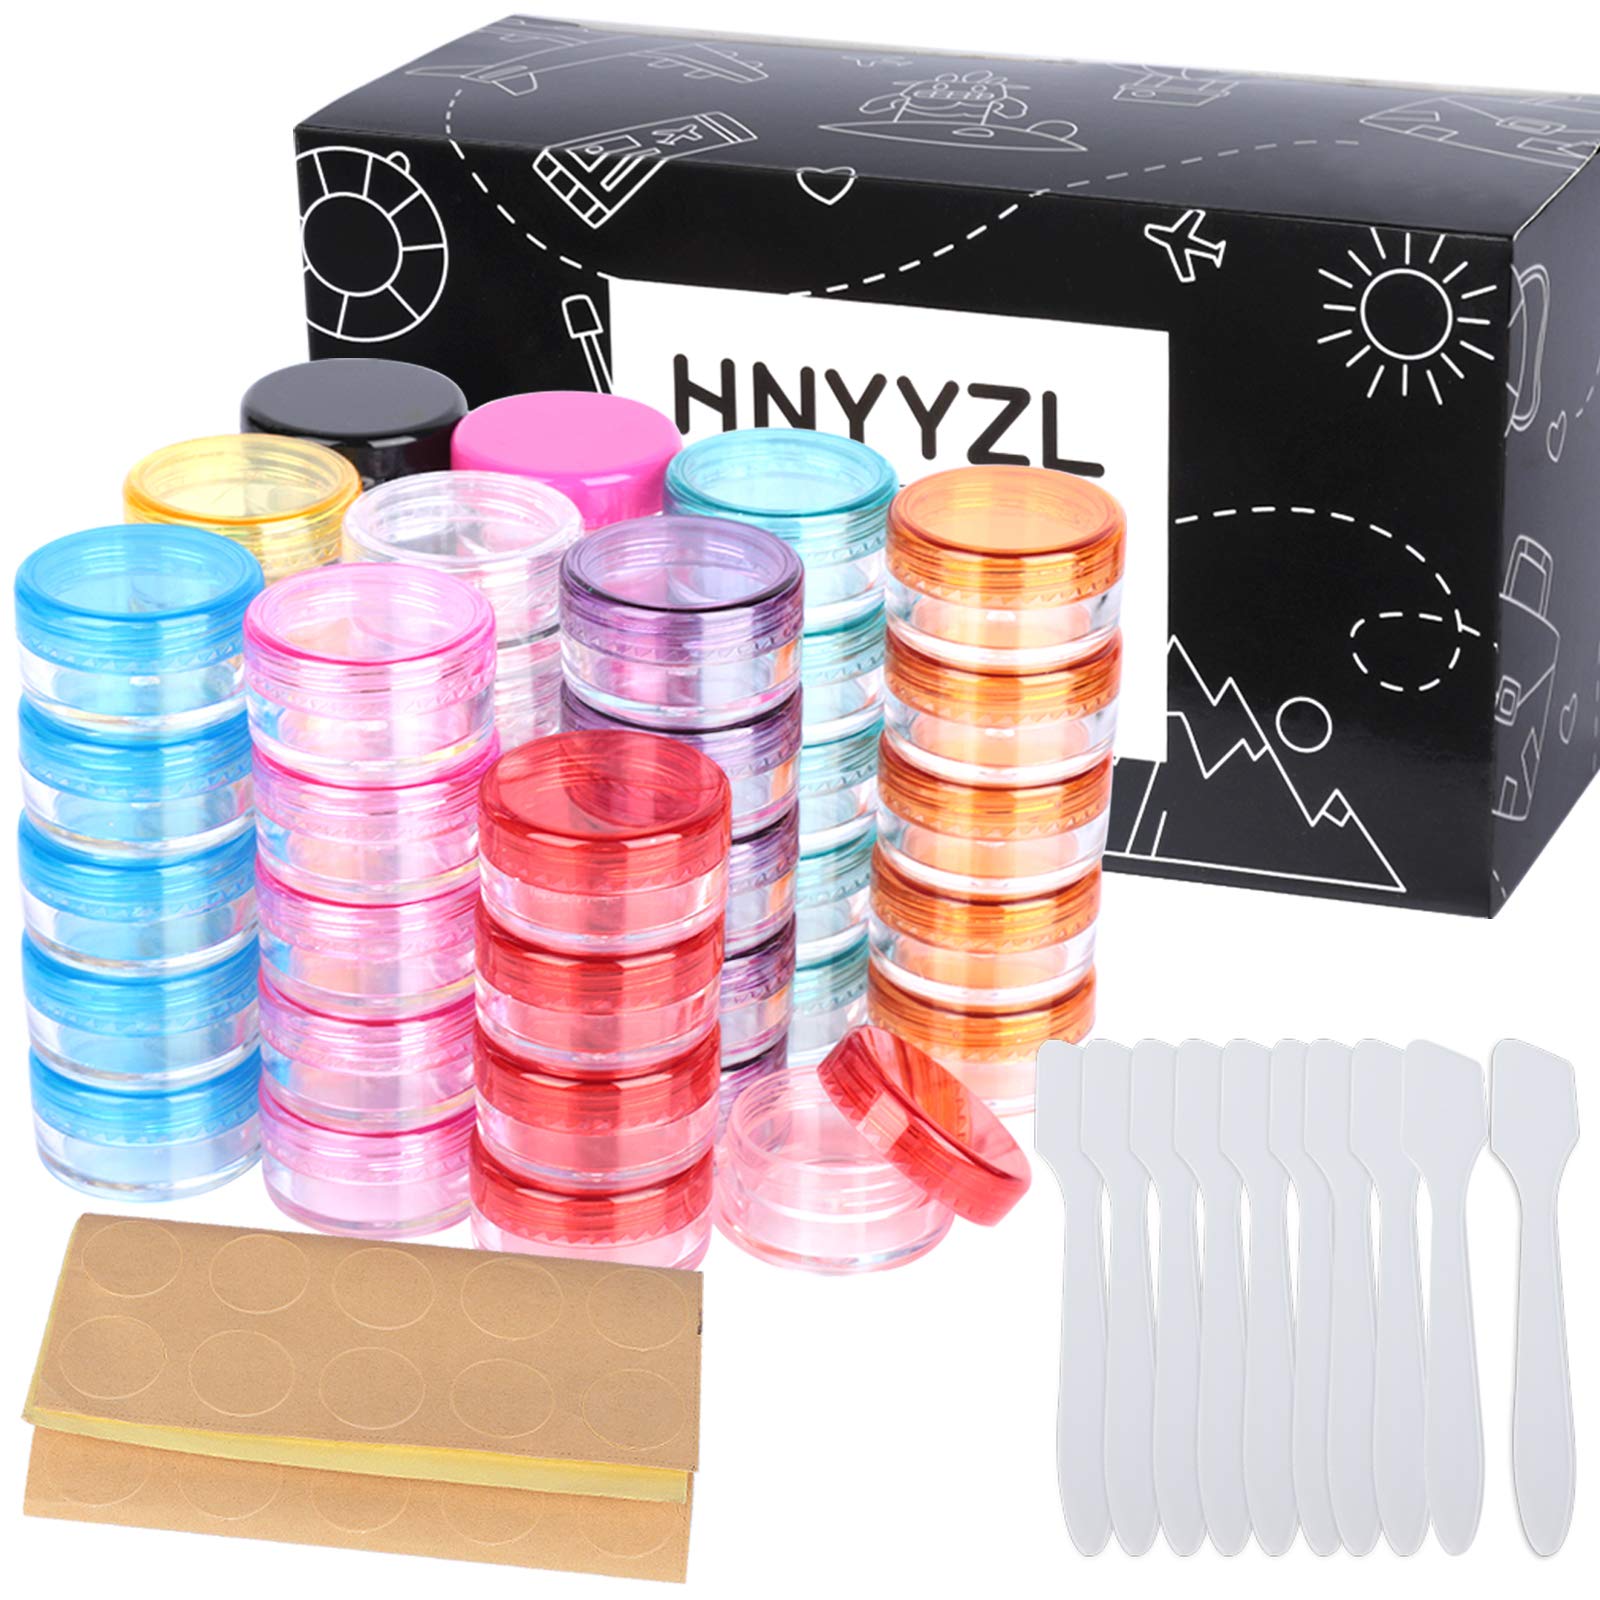 50 Pack Sample Container, HNYYZL 5g Empty Cosmetic Containers Plastic  Travel Pot Jar for Liquid Lotion Cream Sample Make-up Storage(10 Colors,  5ML), Come with 10pcs Mini Spatulas and 50pcs Labels